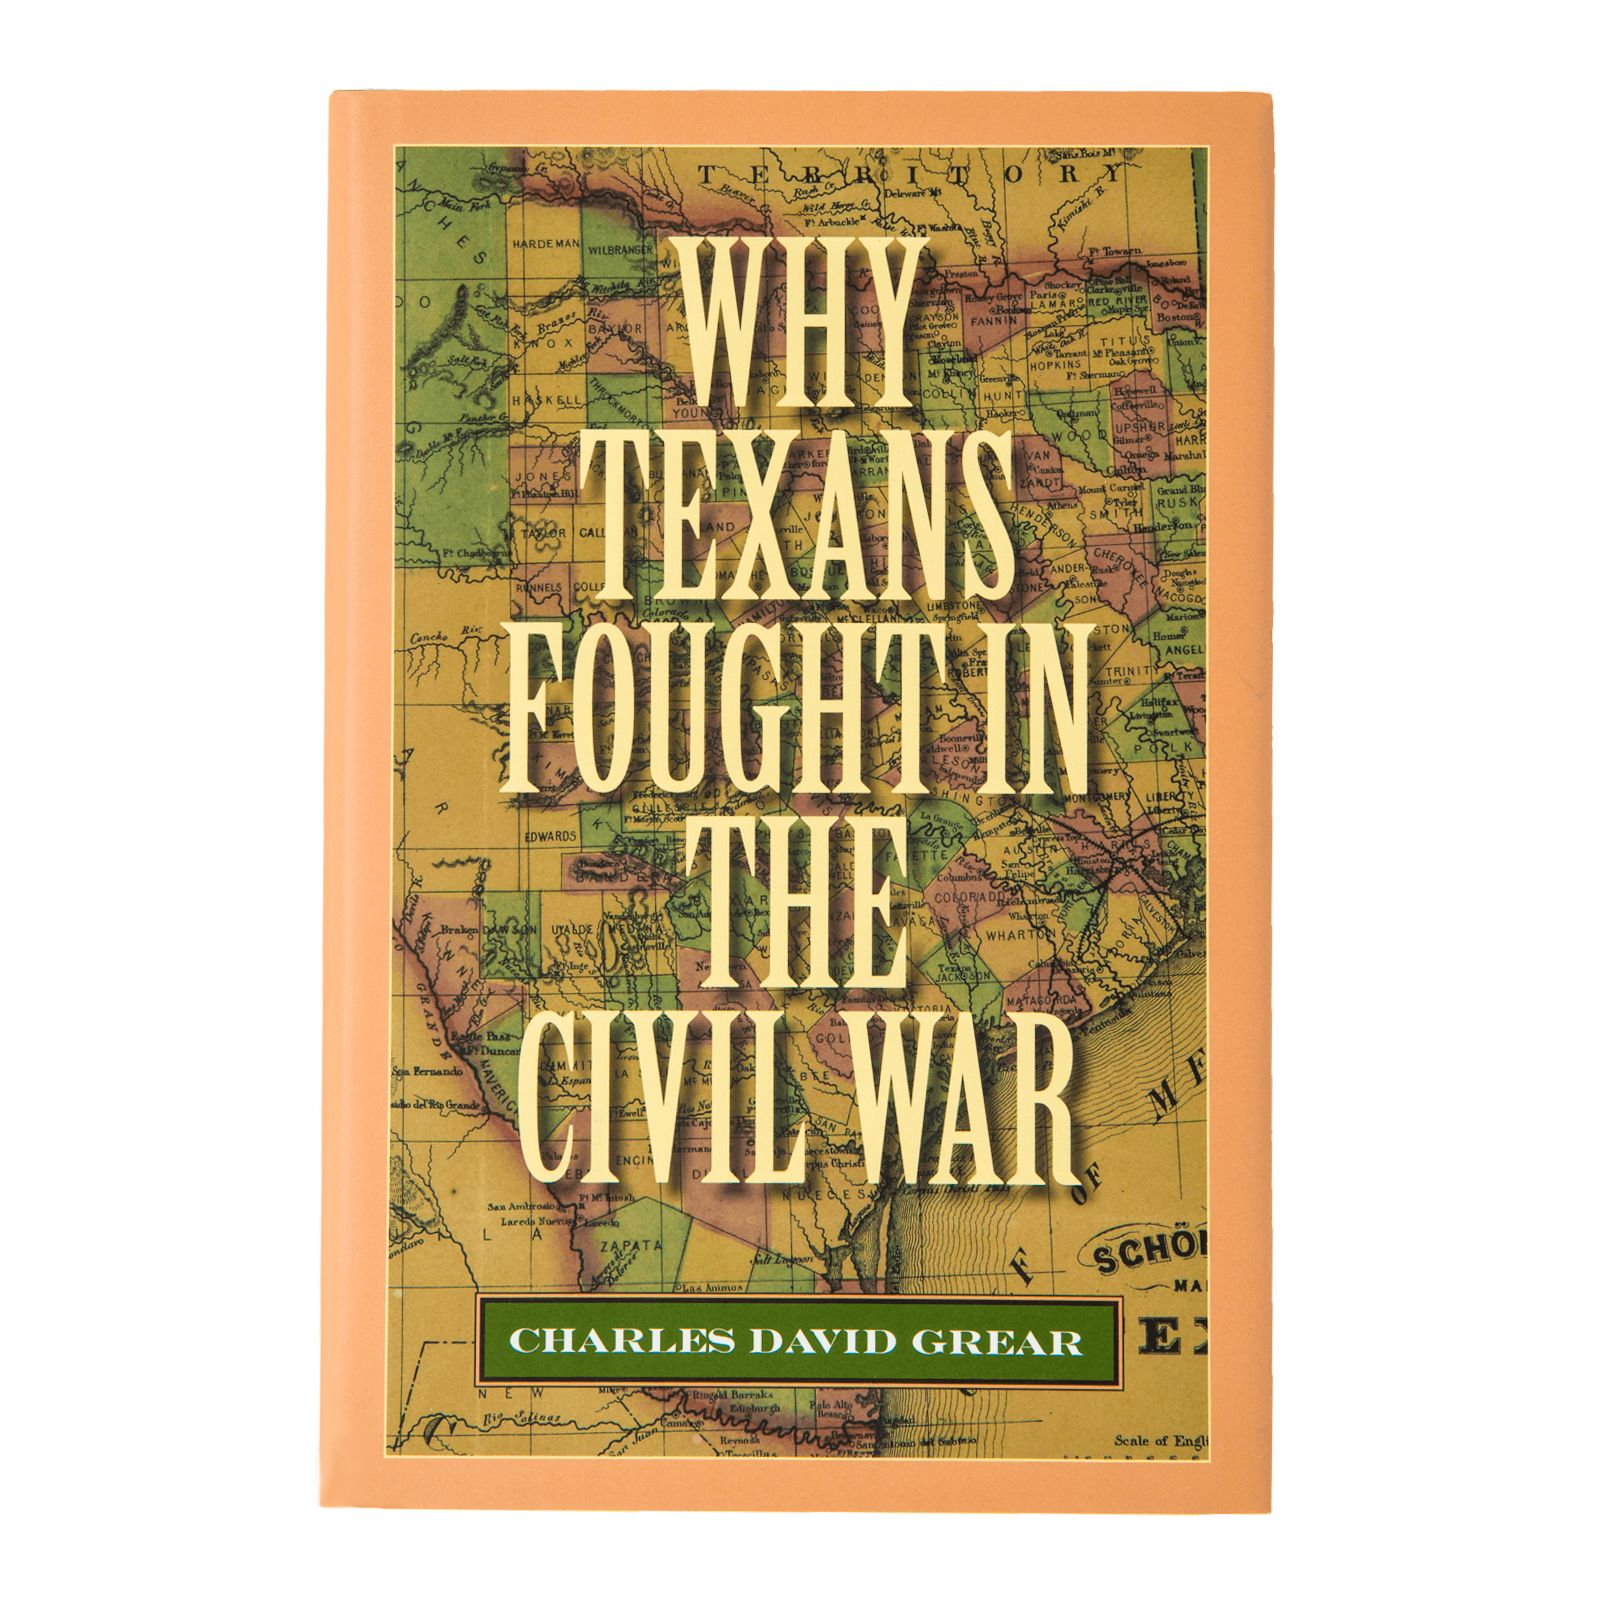 Why Texans Fought in the Civil War